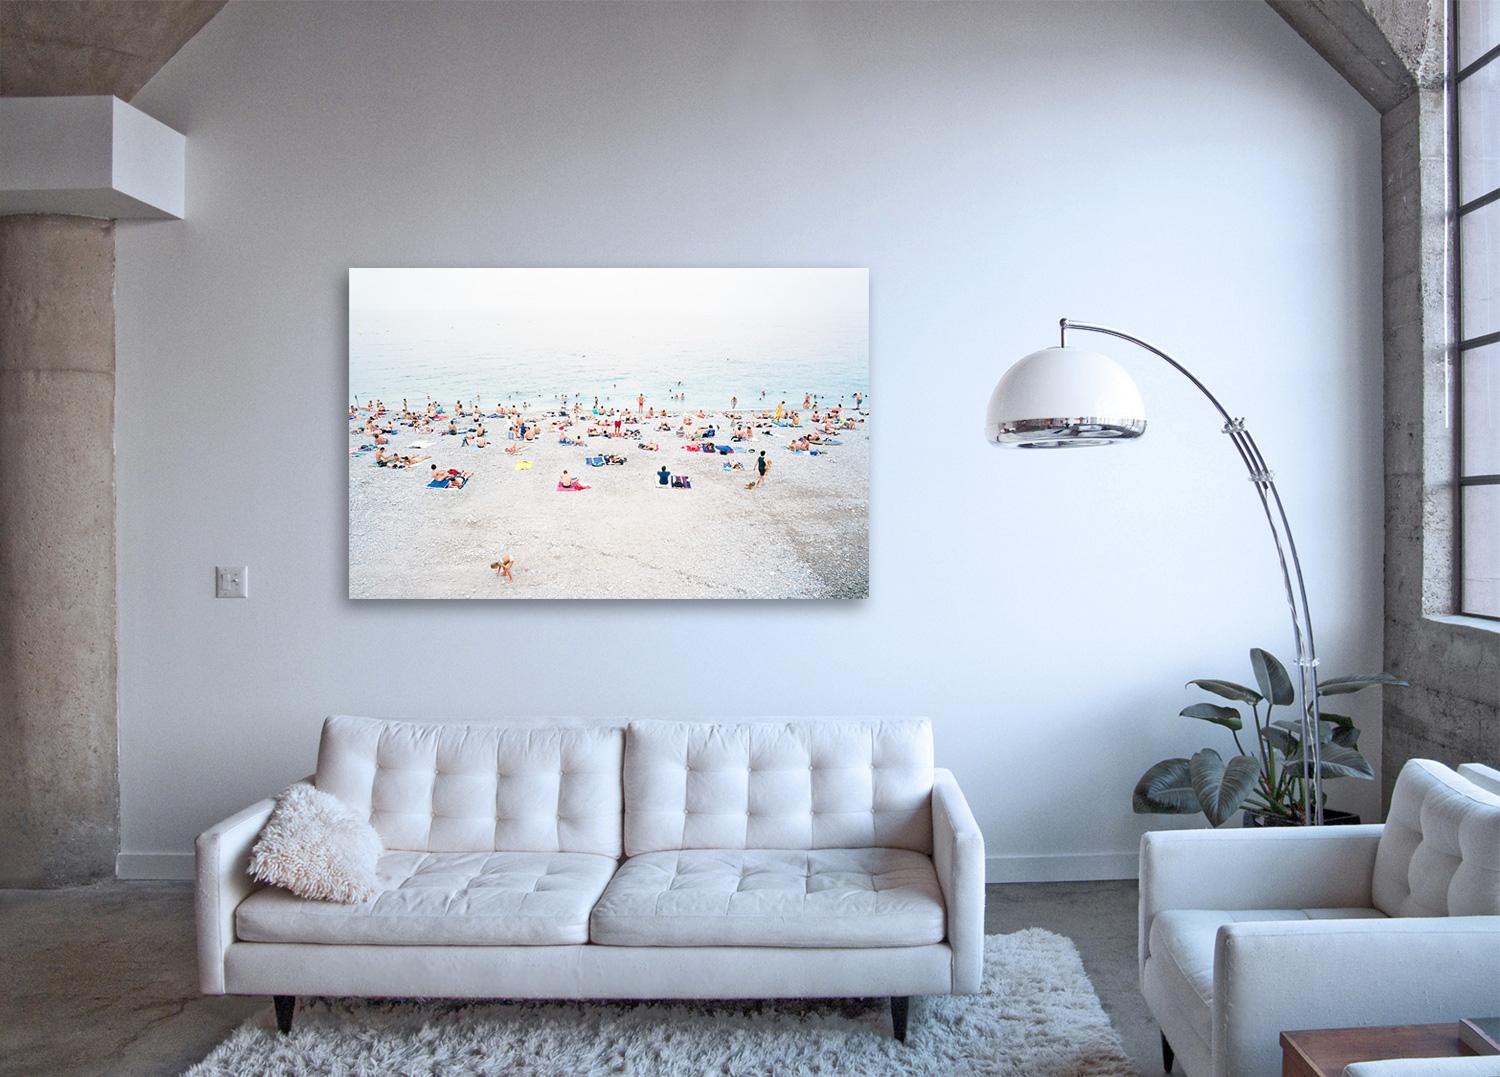 Nizza - large format photograph of summer beach scene in South of France - Photograph by Frank Schott